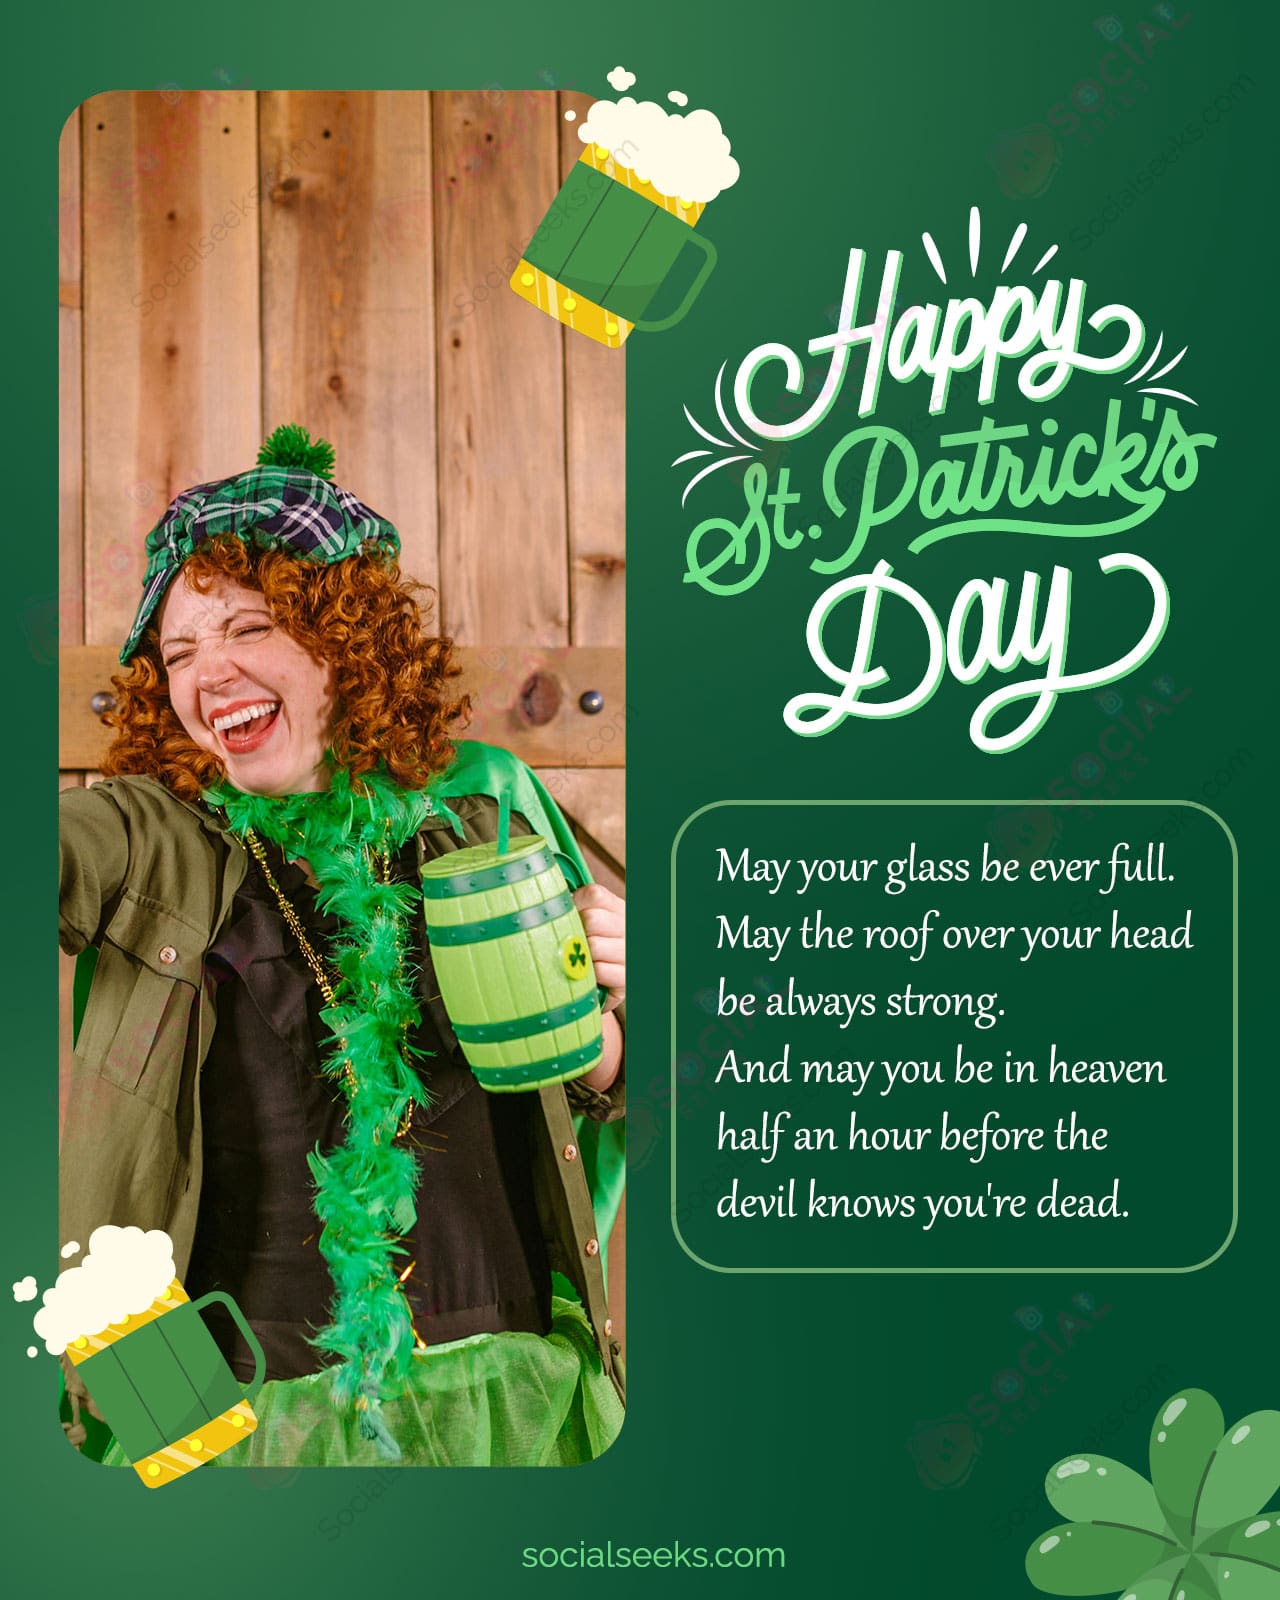 St Patrick's Day Greeting Cards | St Paddy's Day Photo Greeting Cards